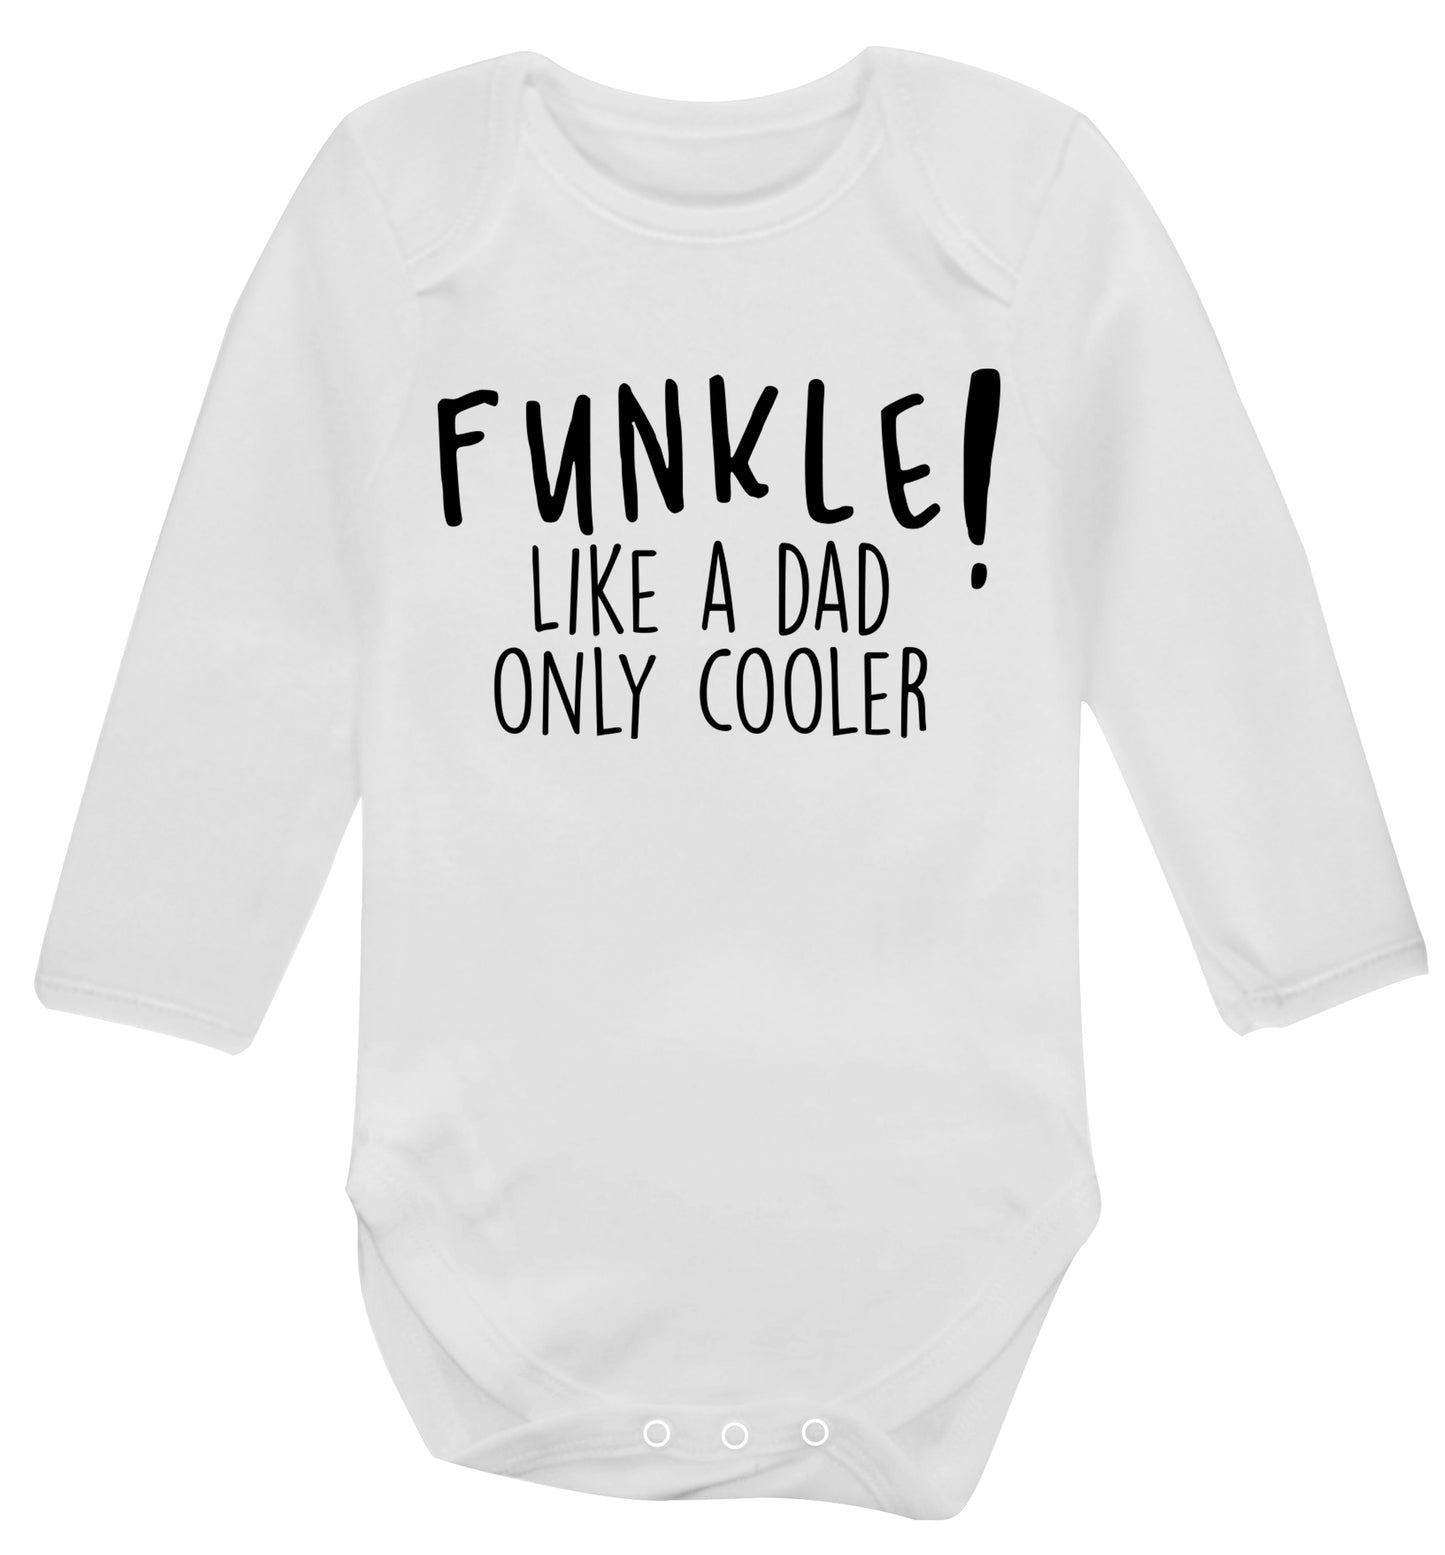 Funkle Like a Dad Only Cooler Baby Vest long sleeved white 6-12 months